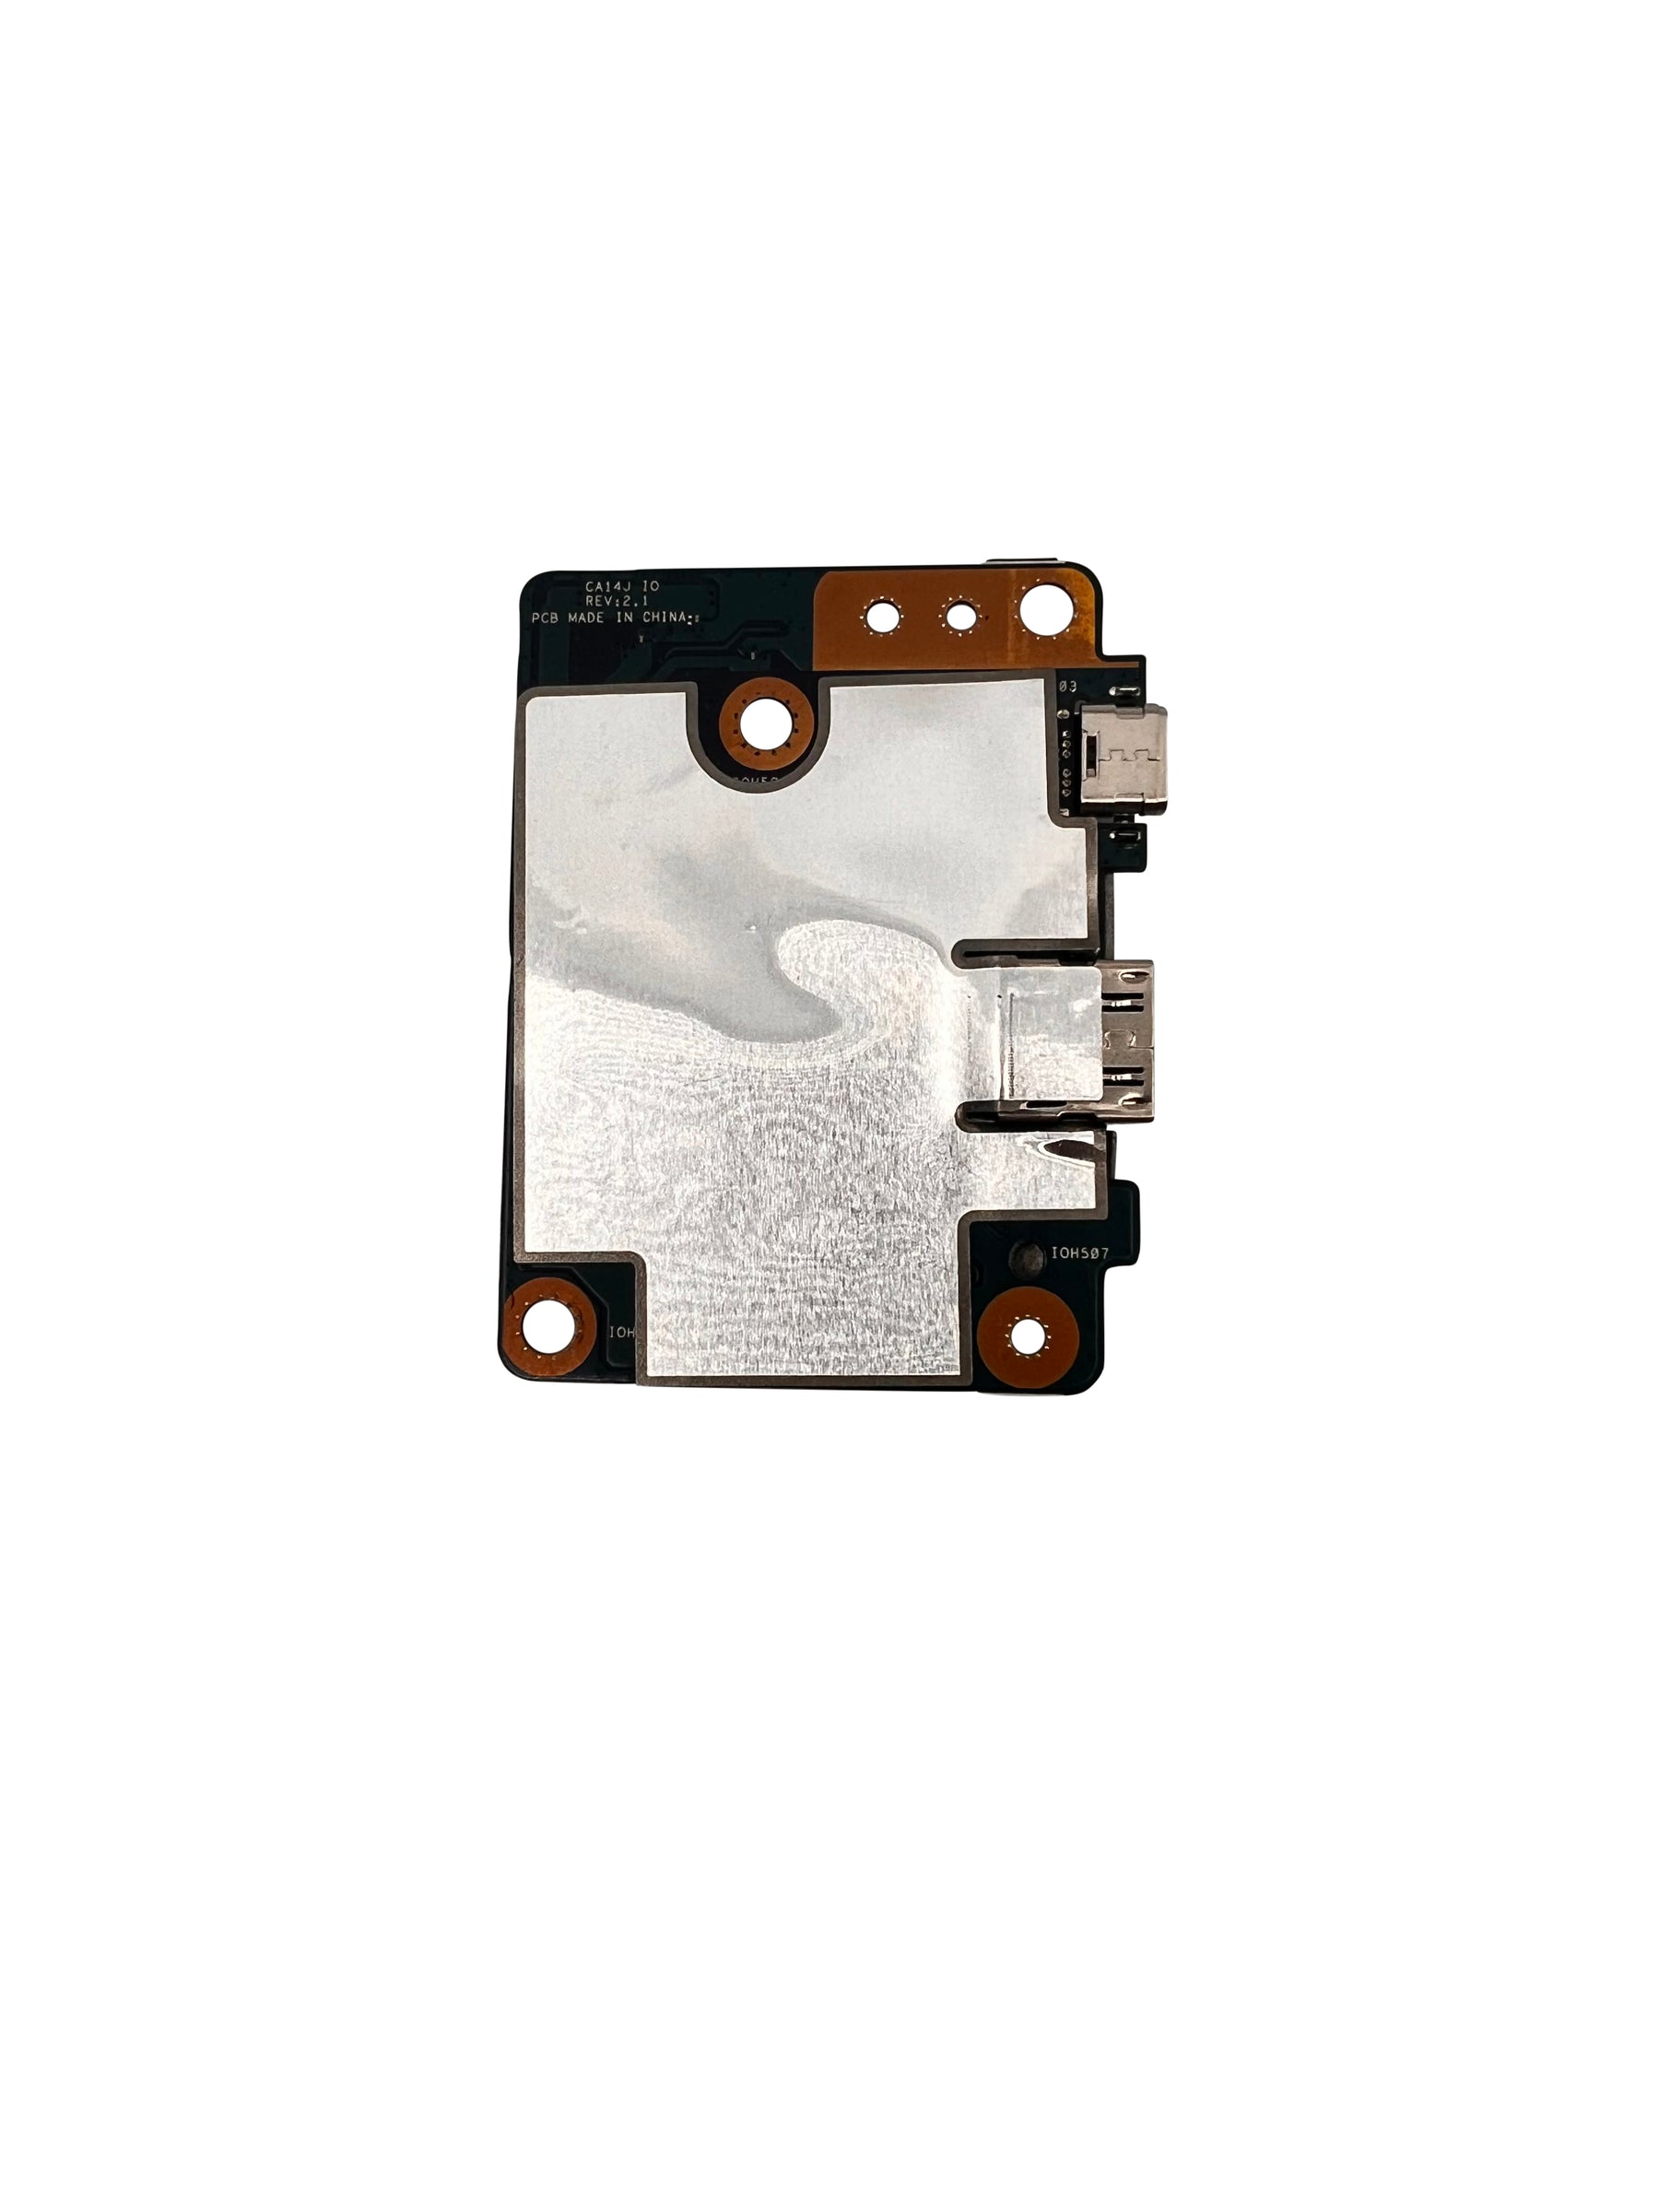 Renewed CTL Chromebook PX14 Series Replacement USB/C Board